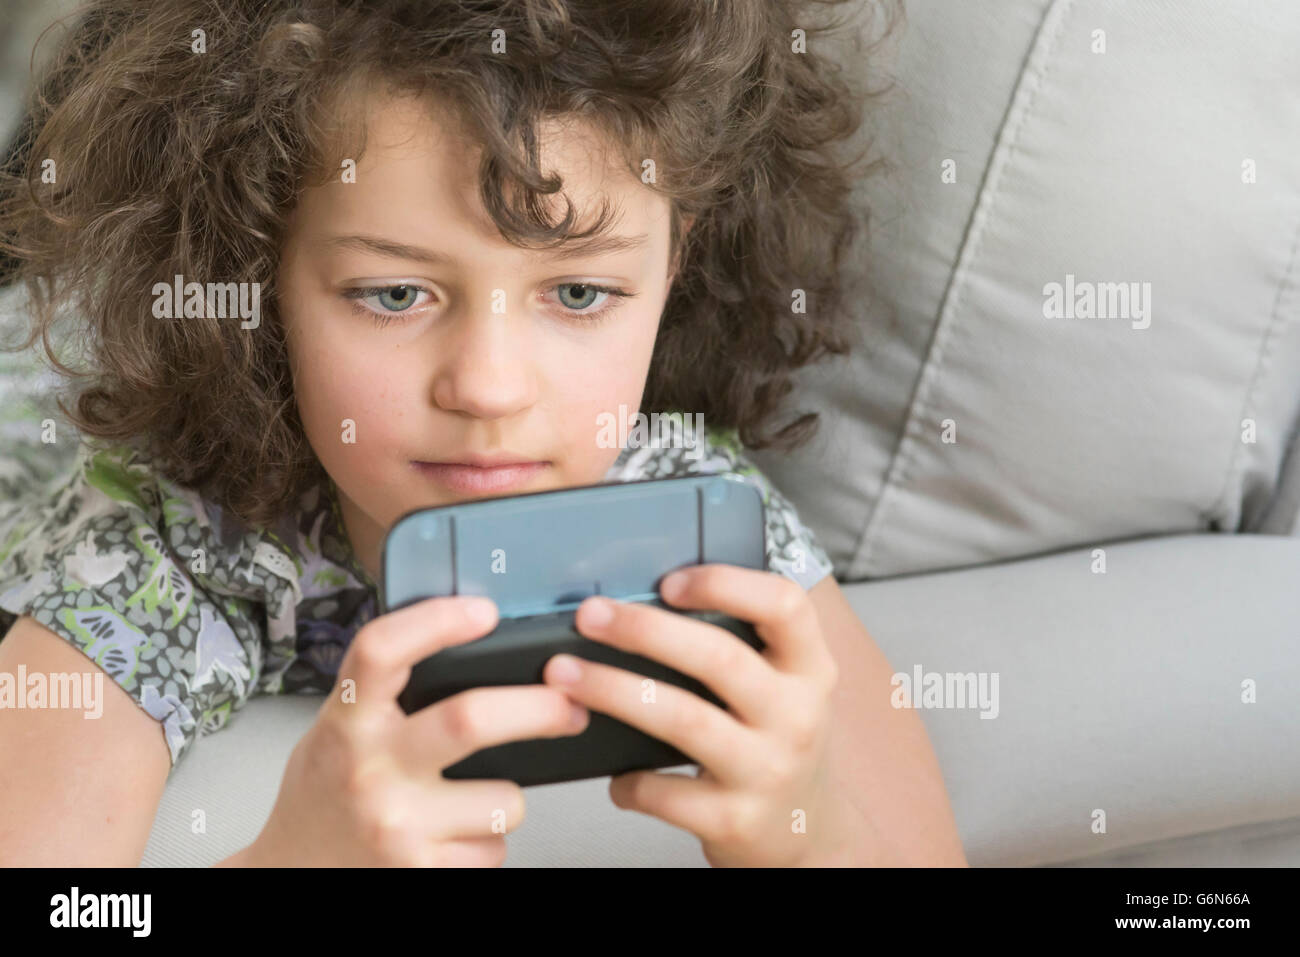 Girl playing with mobile device Stock Photo